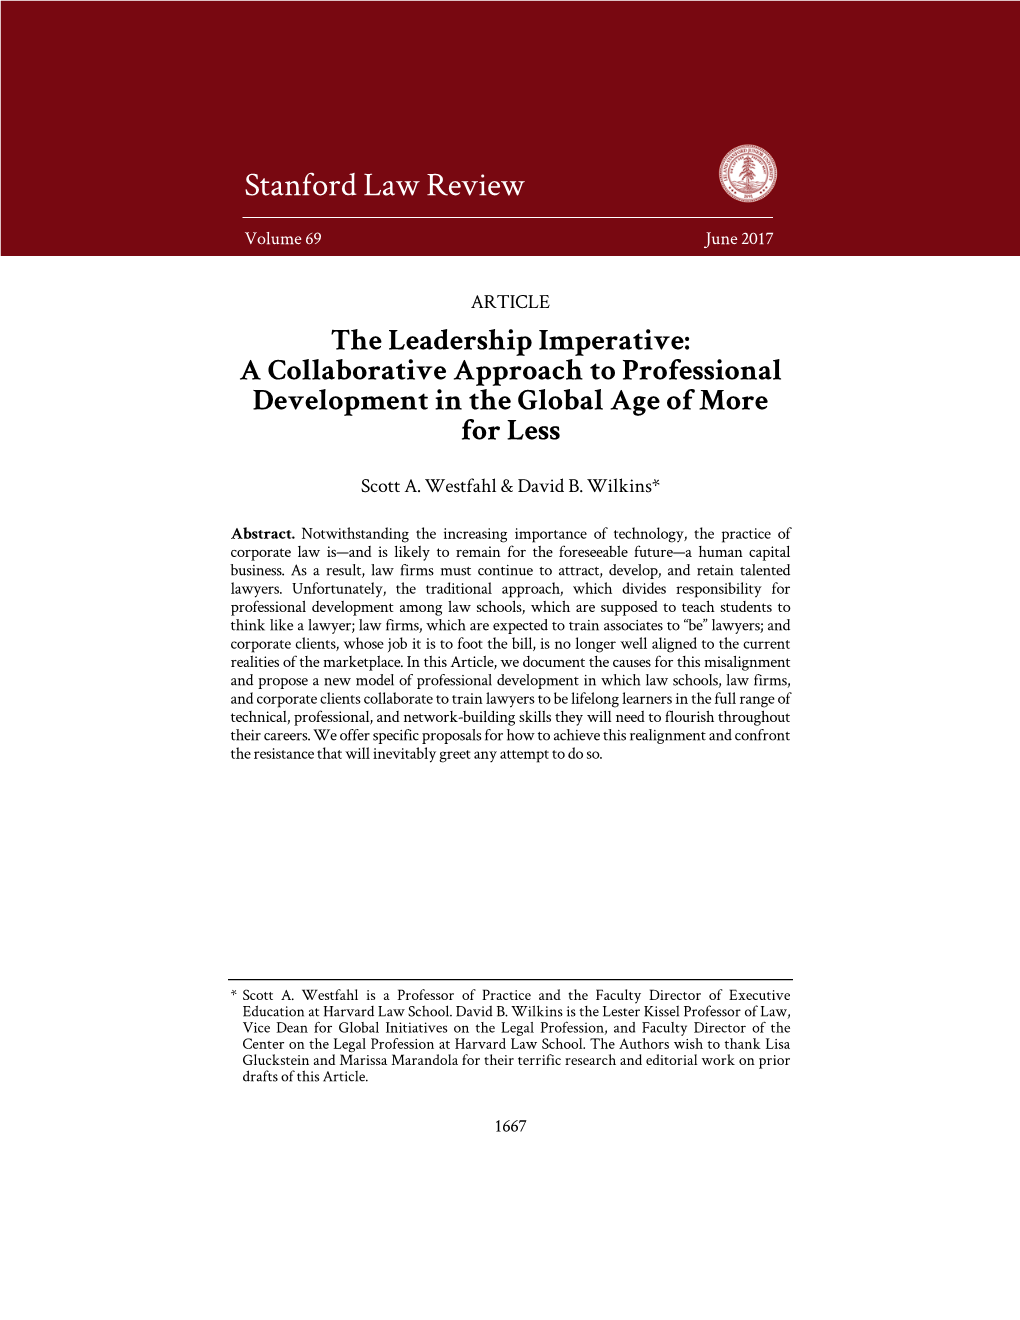 The Leadership Imperative: a Collaborative Approach to Professional Development in the Global Age of More for Less